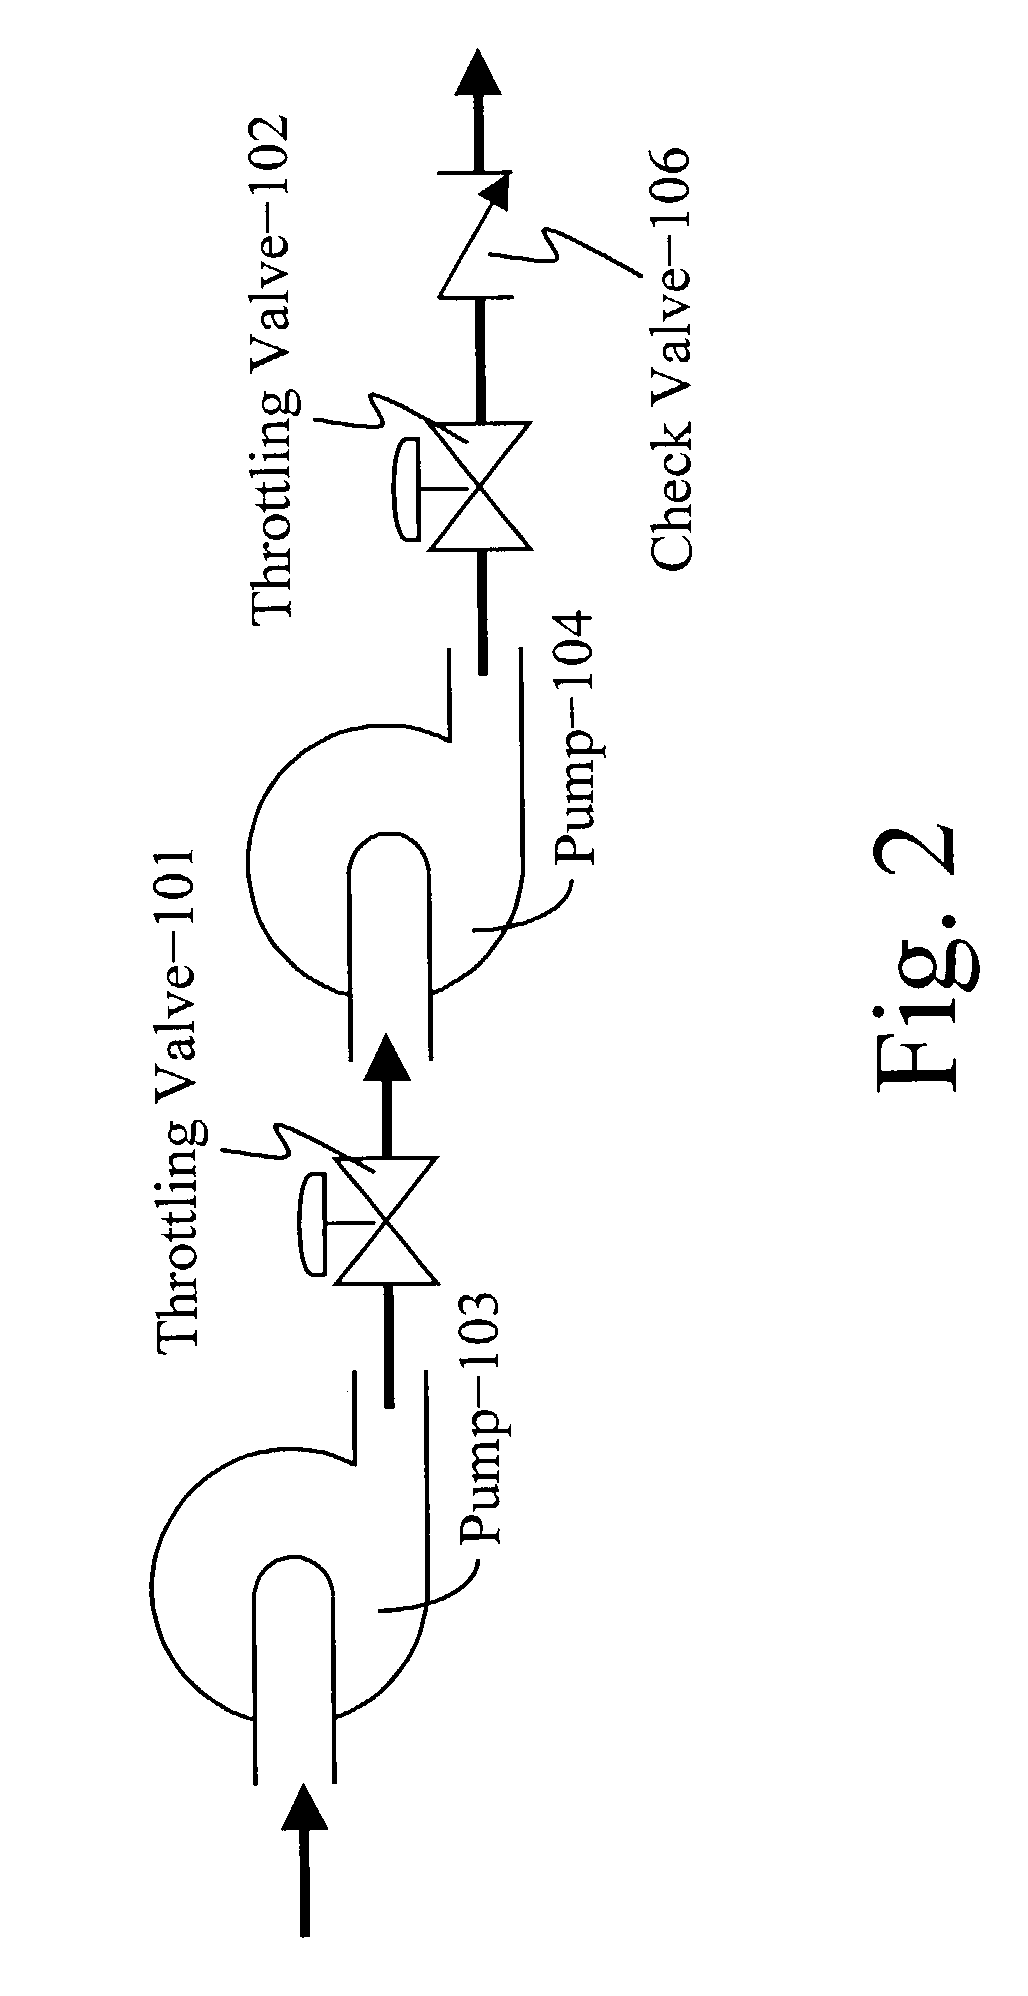 Controlling multiple pumps operating in parallel or series